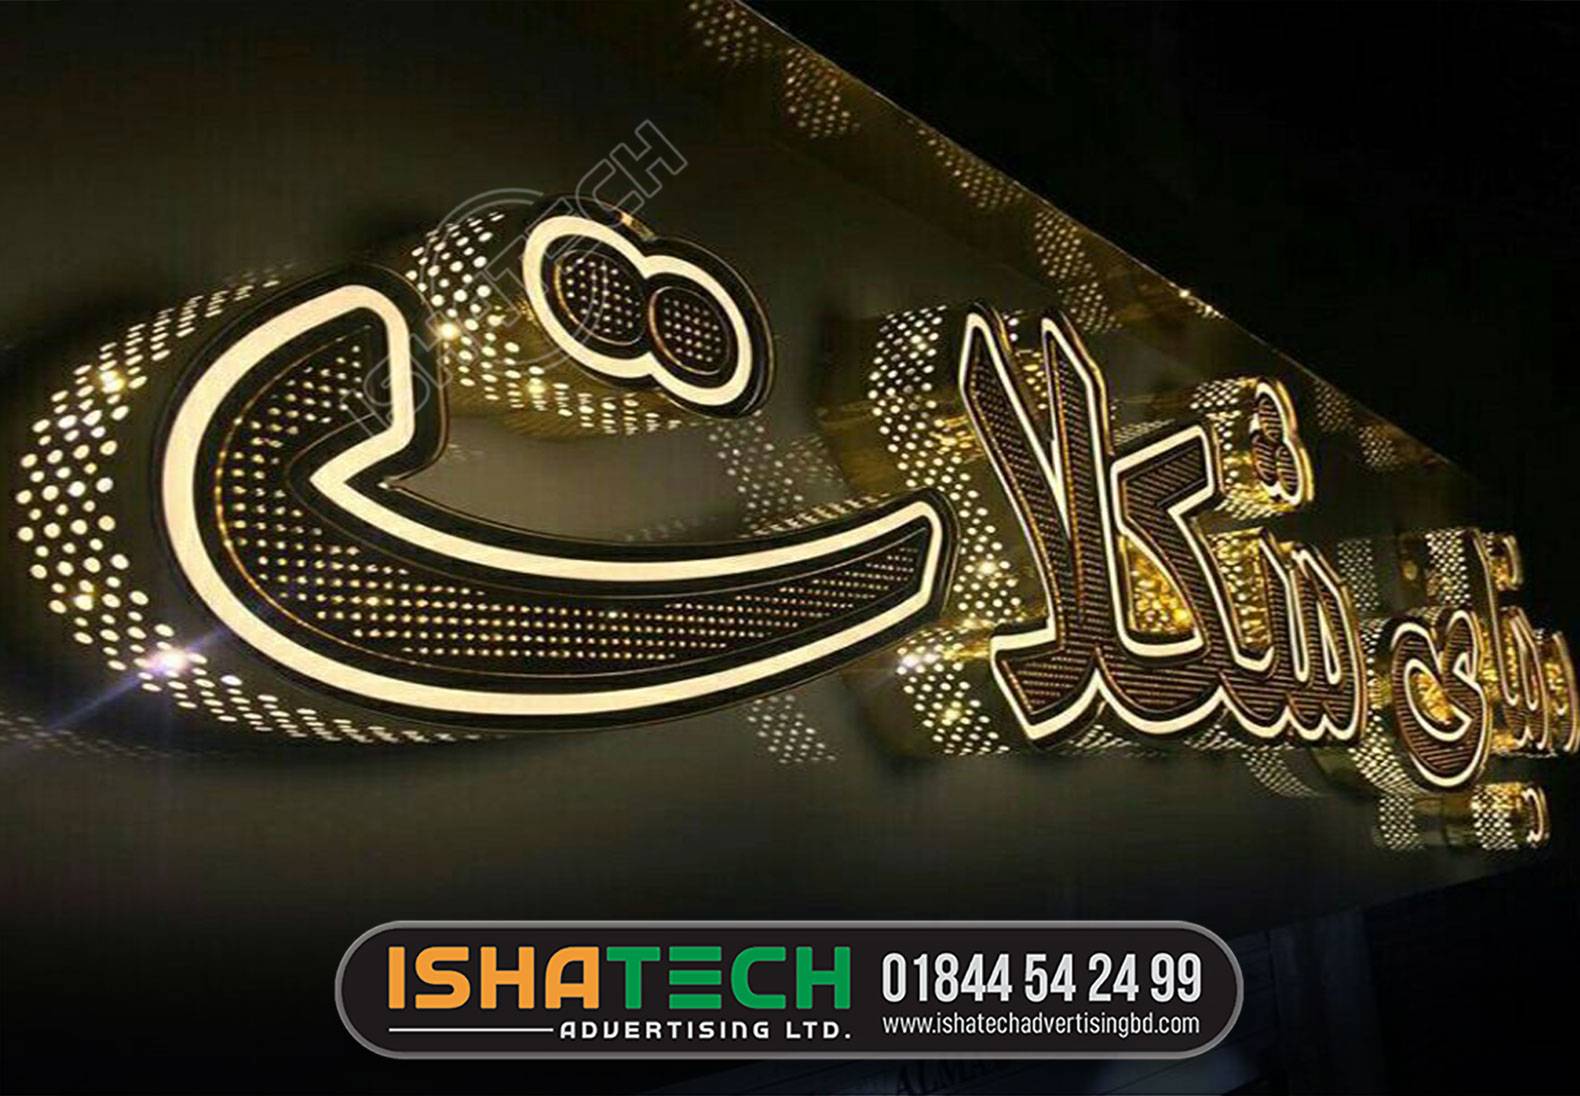 ARABIC LETTER MAKING BY ACRYLIC AND SS LETTER SIGNAGE | Arabic alphabet LETTER SIGNS BY ACRYLIC SHEET ISHATECH ADVERTISING LTD